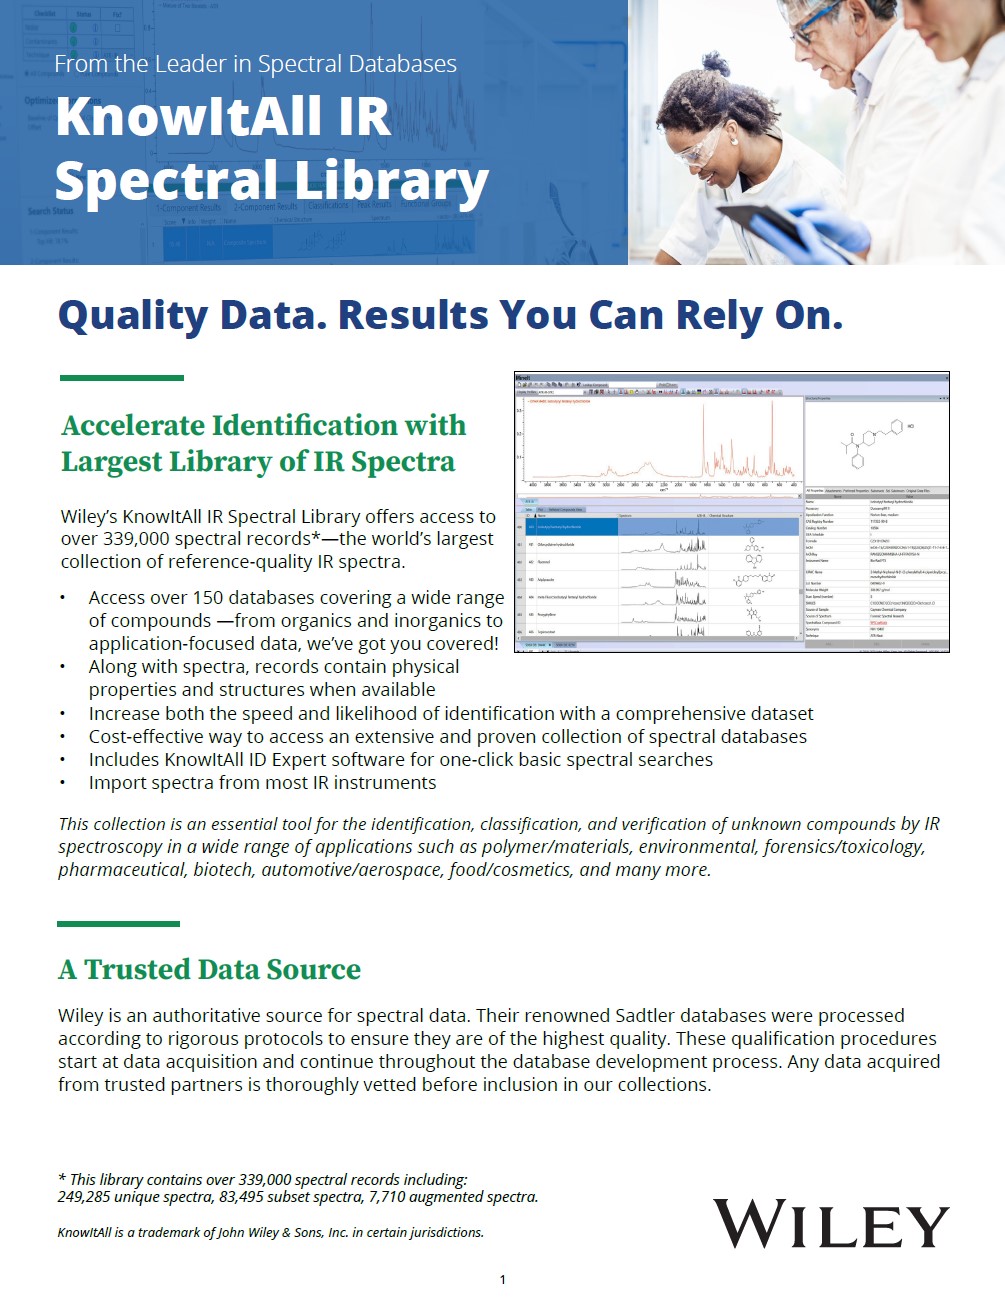 Wiley KnowItAll IR Spectral Database Collection